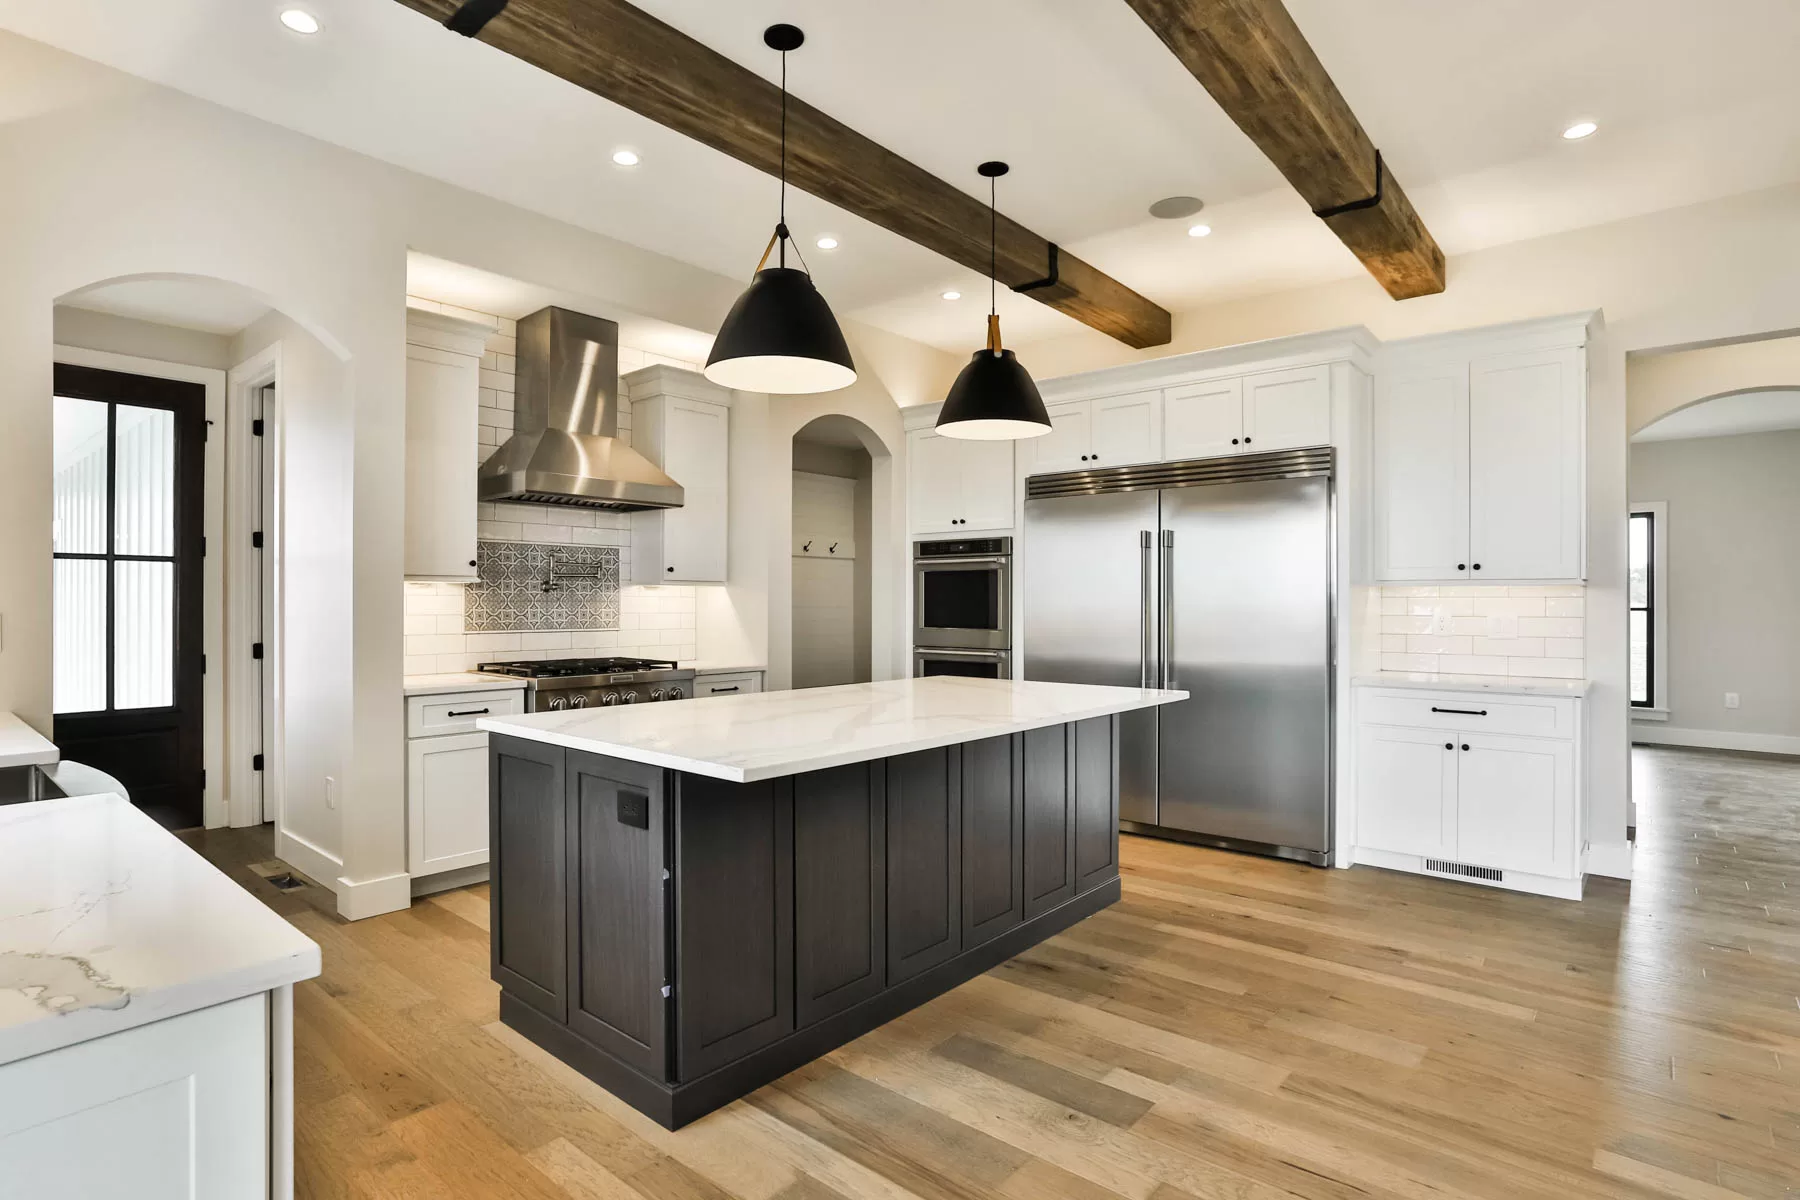 Upgraded finishes in the kitchen